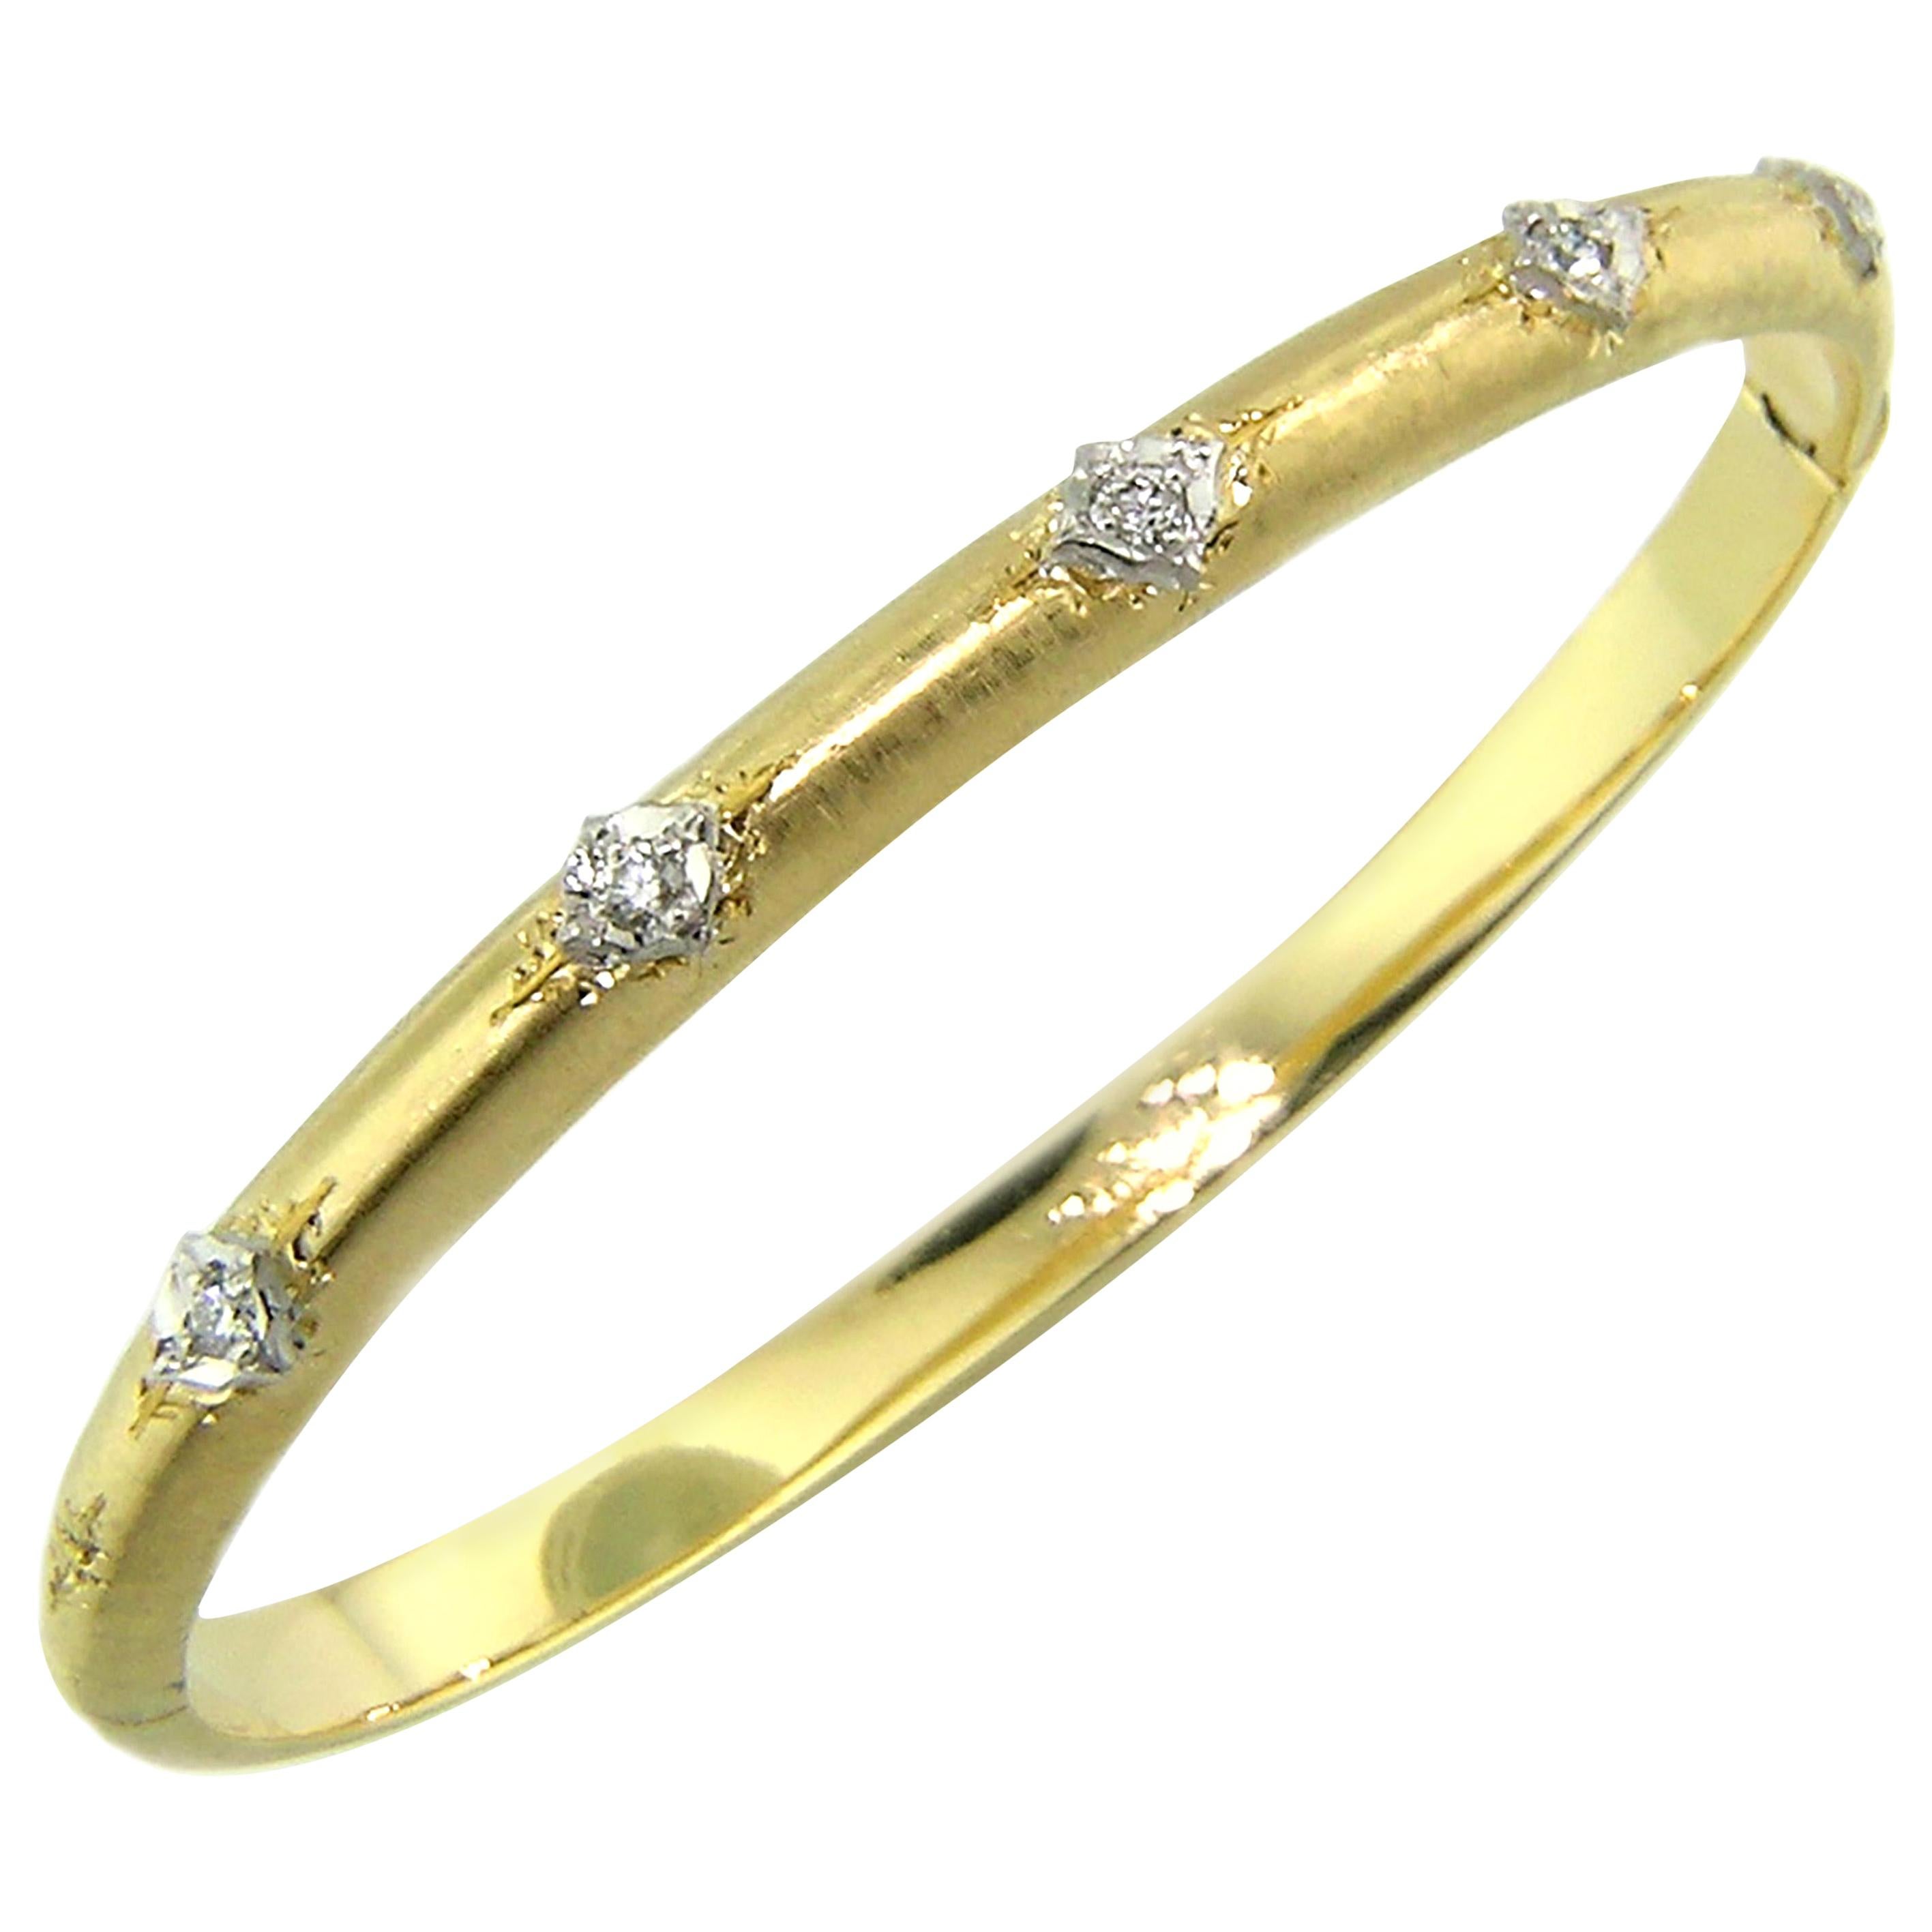 SET OF THREE: One yellow, one rose, one white gold.

The Andrea Bangle will be your perfect everyday favorite. Sumptuous details and gorgeous diamonds are framed in an oval bangle which is perfect for everyday wear. This style is at once classical